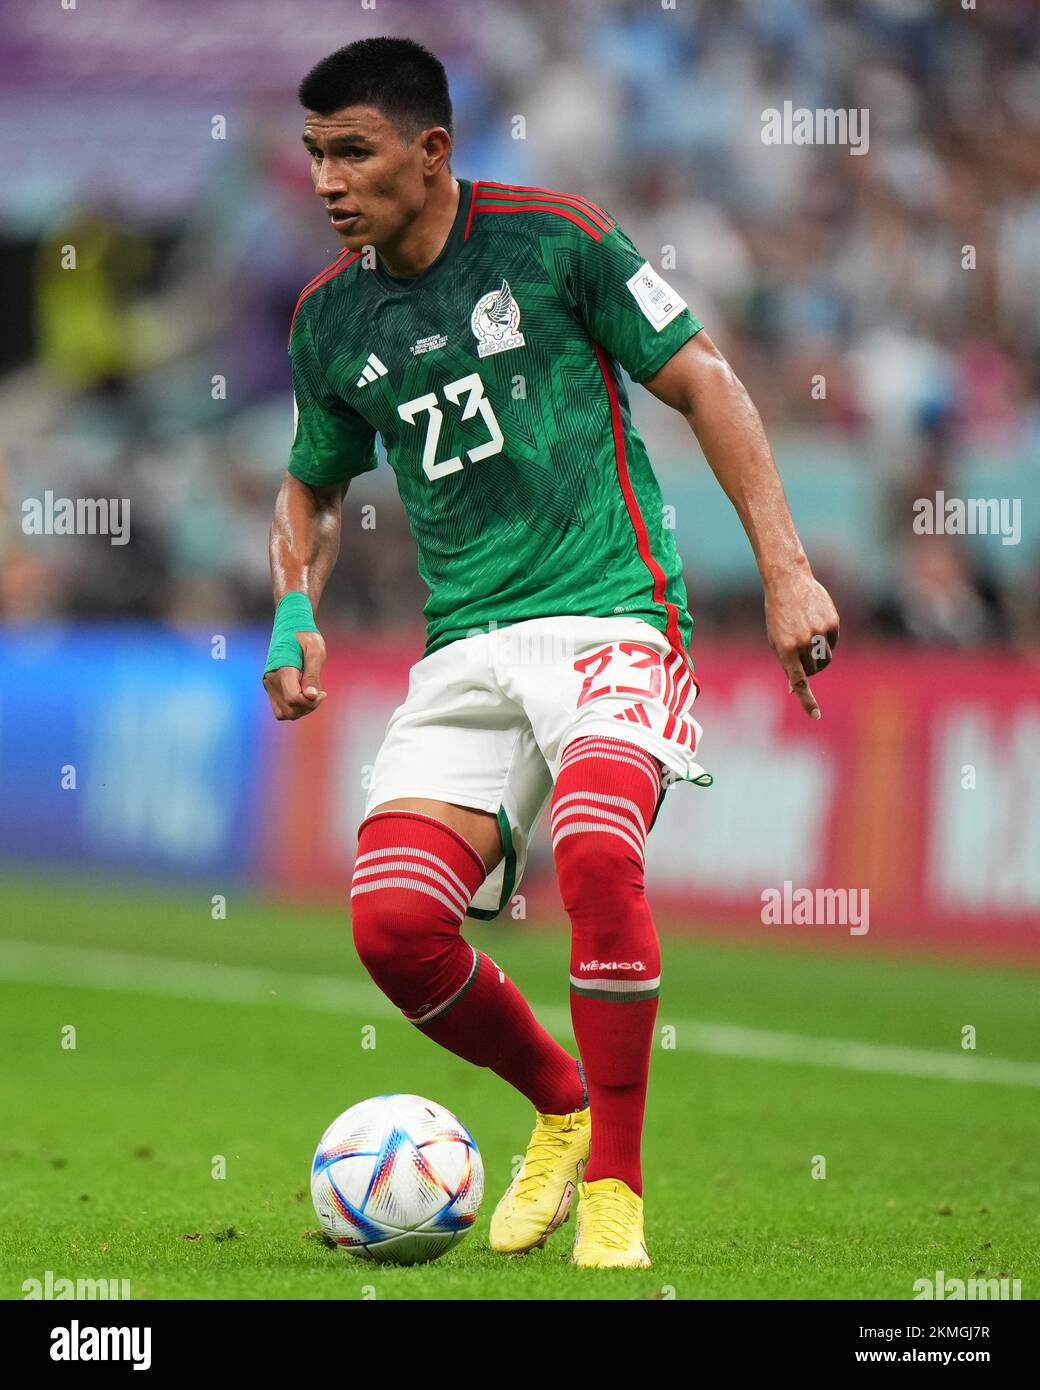 Jesus Gallardo of Mexico during the FIFA World Cup Qatar 2022 match, Group C, between Argentina and Mexico played at Lusail Stadium on Nov 26, 2022 in Lusail, Qatar. (Photo by Bagu Blanco / PRESSIN) Credit: PRESSINPHOTO SPORTS AGENCY/Alamy Live News Stock Photo